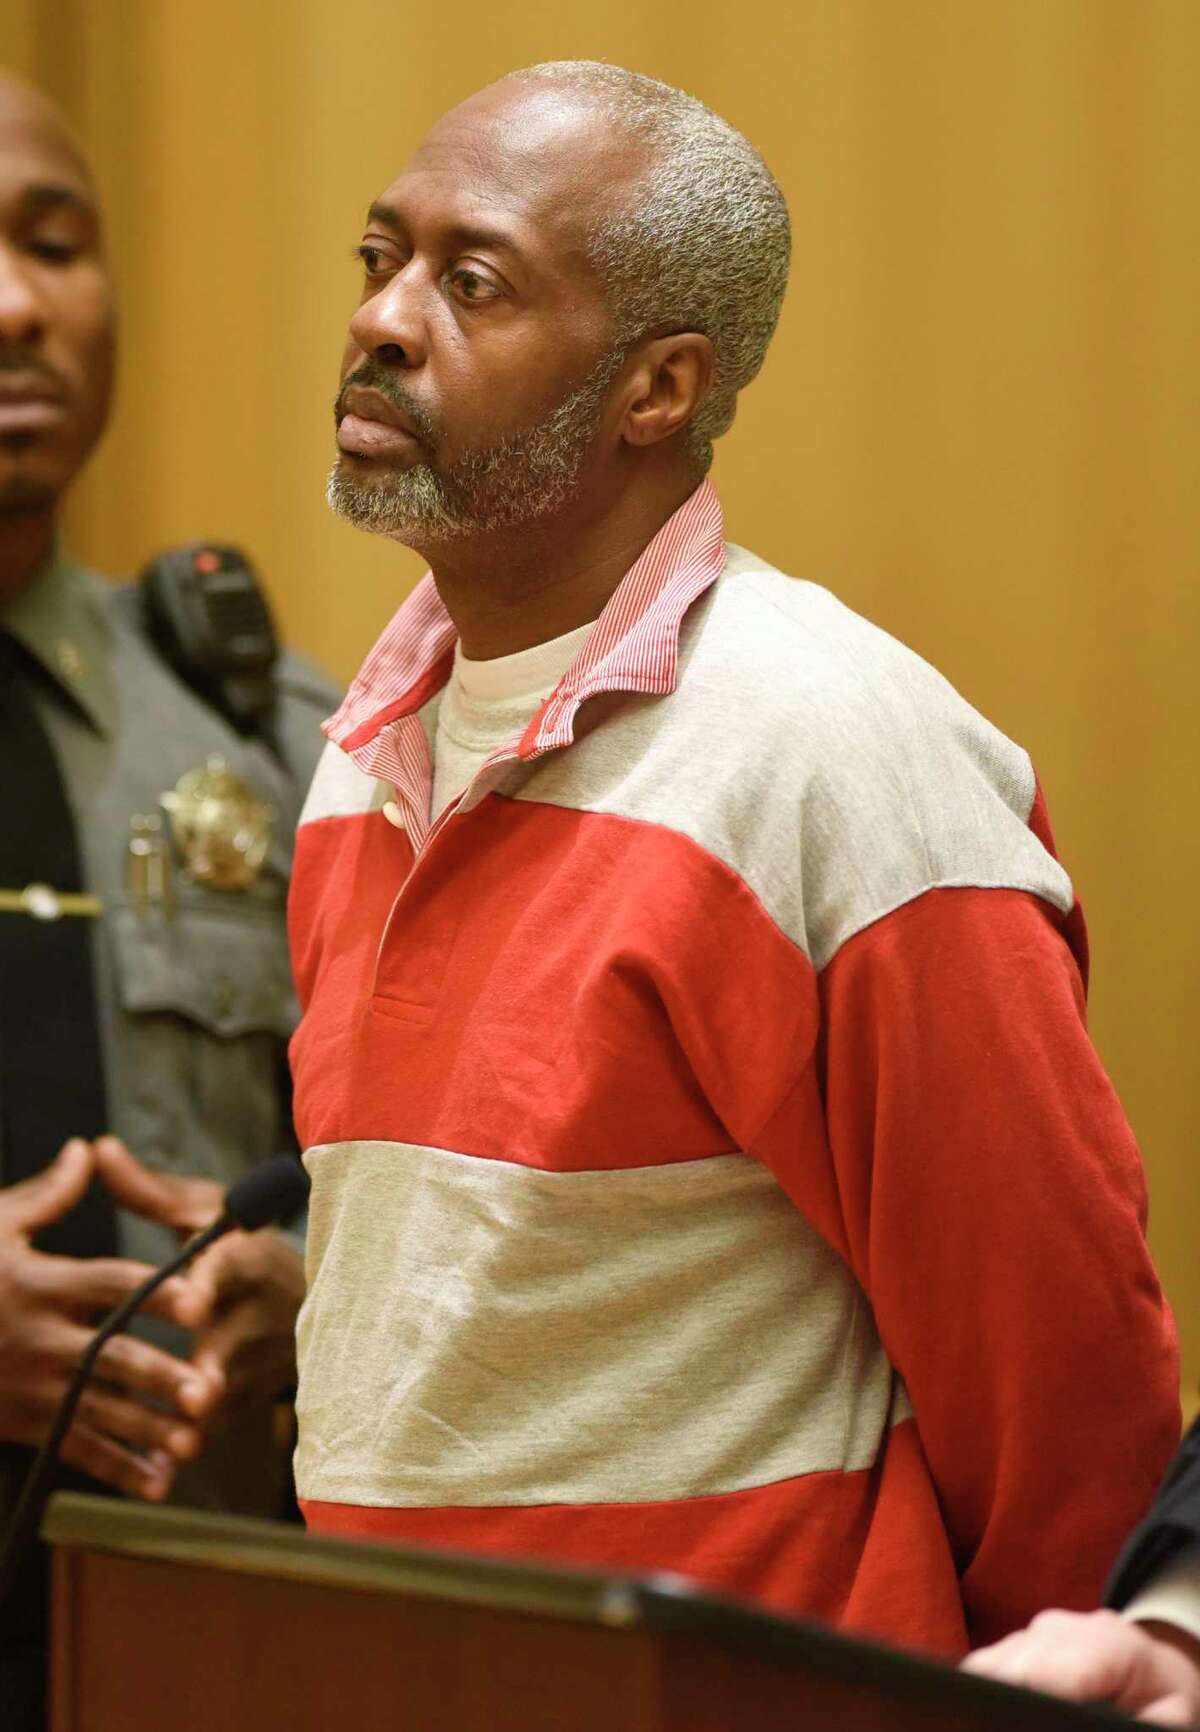 Stamford's Robert Simmons, 51, is arraigned on charges of murder, felony murder and home invasion at Connecticut Superior Court in Stamford, Conn. Wednesday, Nov. 20, 2019. Simmons allegedly murdered 93-year-old Isabella Mehner in her Stamford South End home on Sept. 25. According to the medical examiner, Mehner’s injuries were not consistent with a fall down the stairs, and Simmons was identified as a suspect in the homicide using DNA analysis to match a spot of blood found on his pants to Mehner.